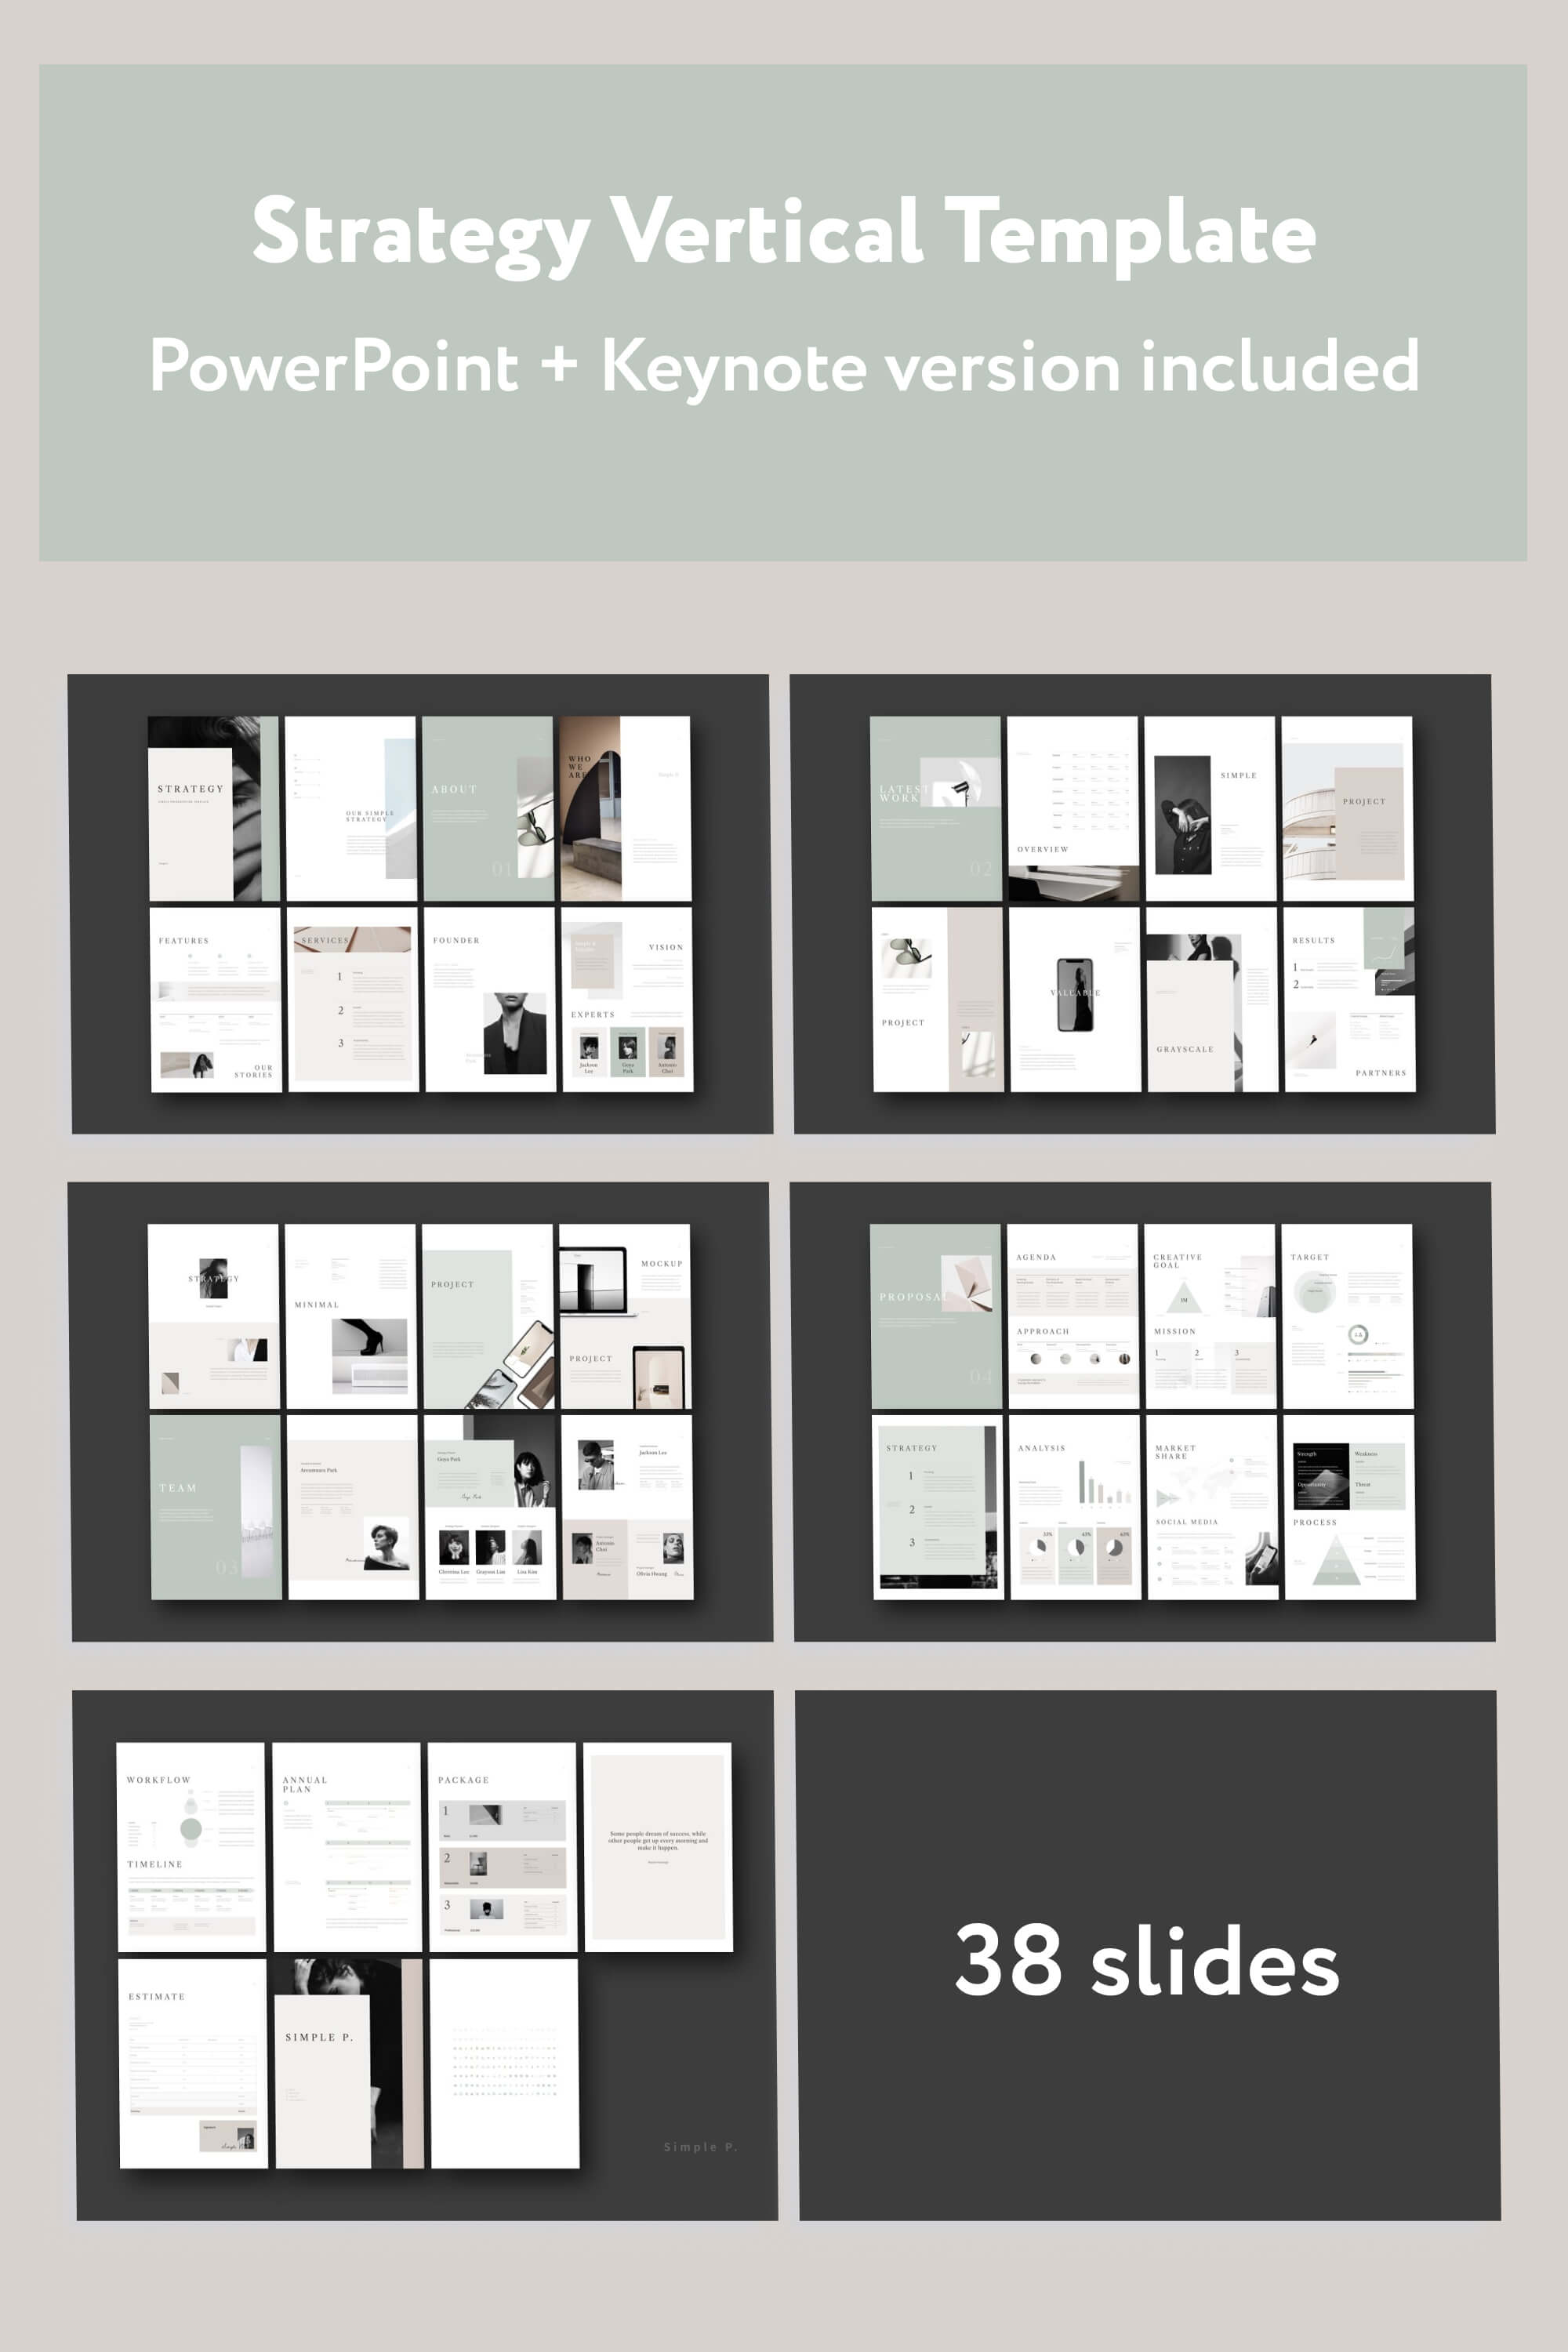 Strategy Vertical Template PowerPoint and Keynote Version Included 38 Slides.